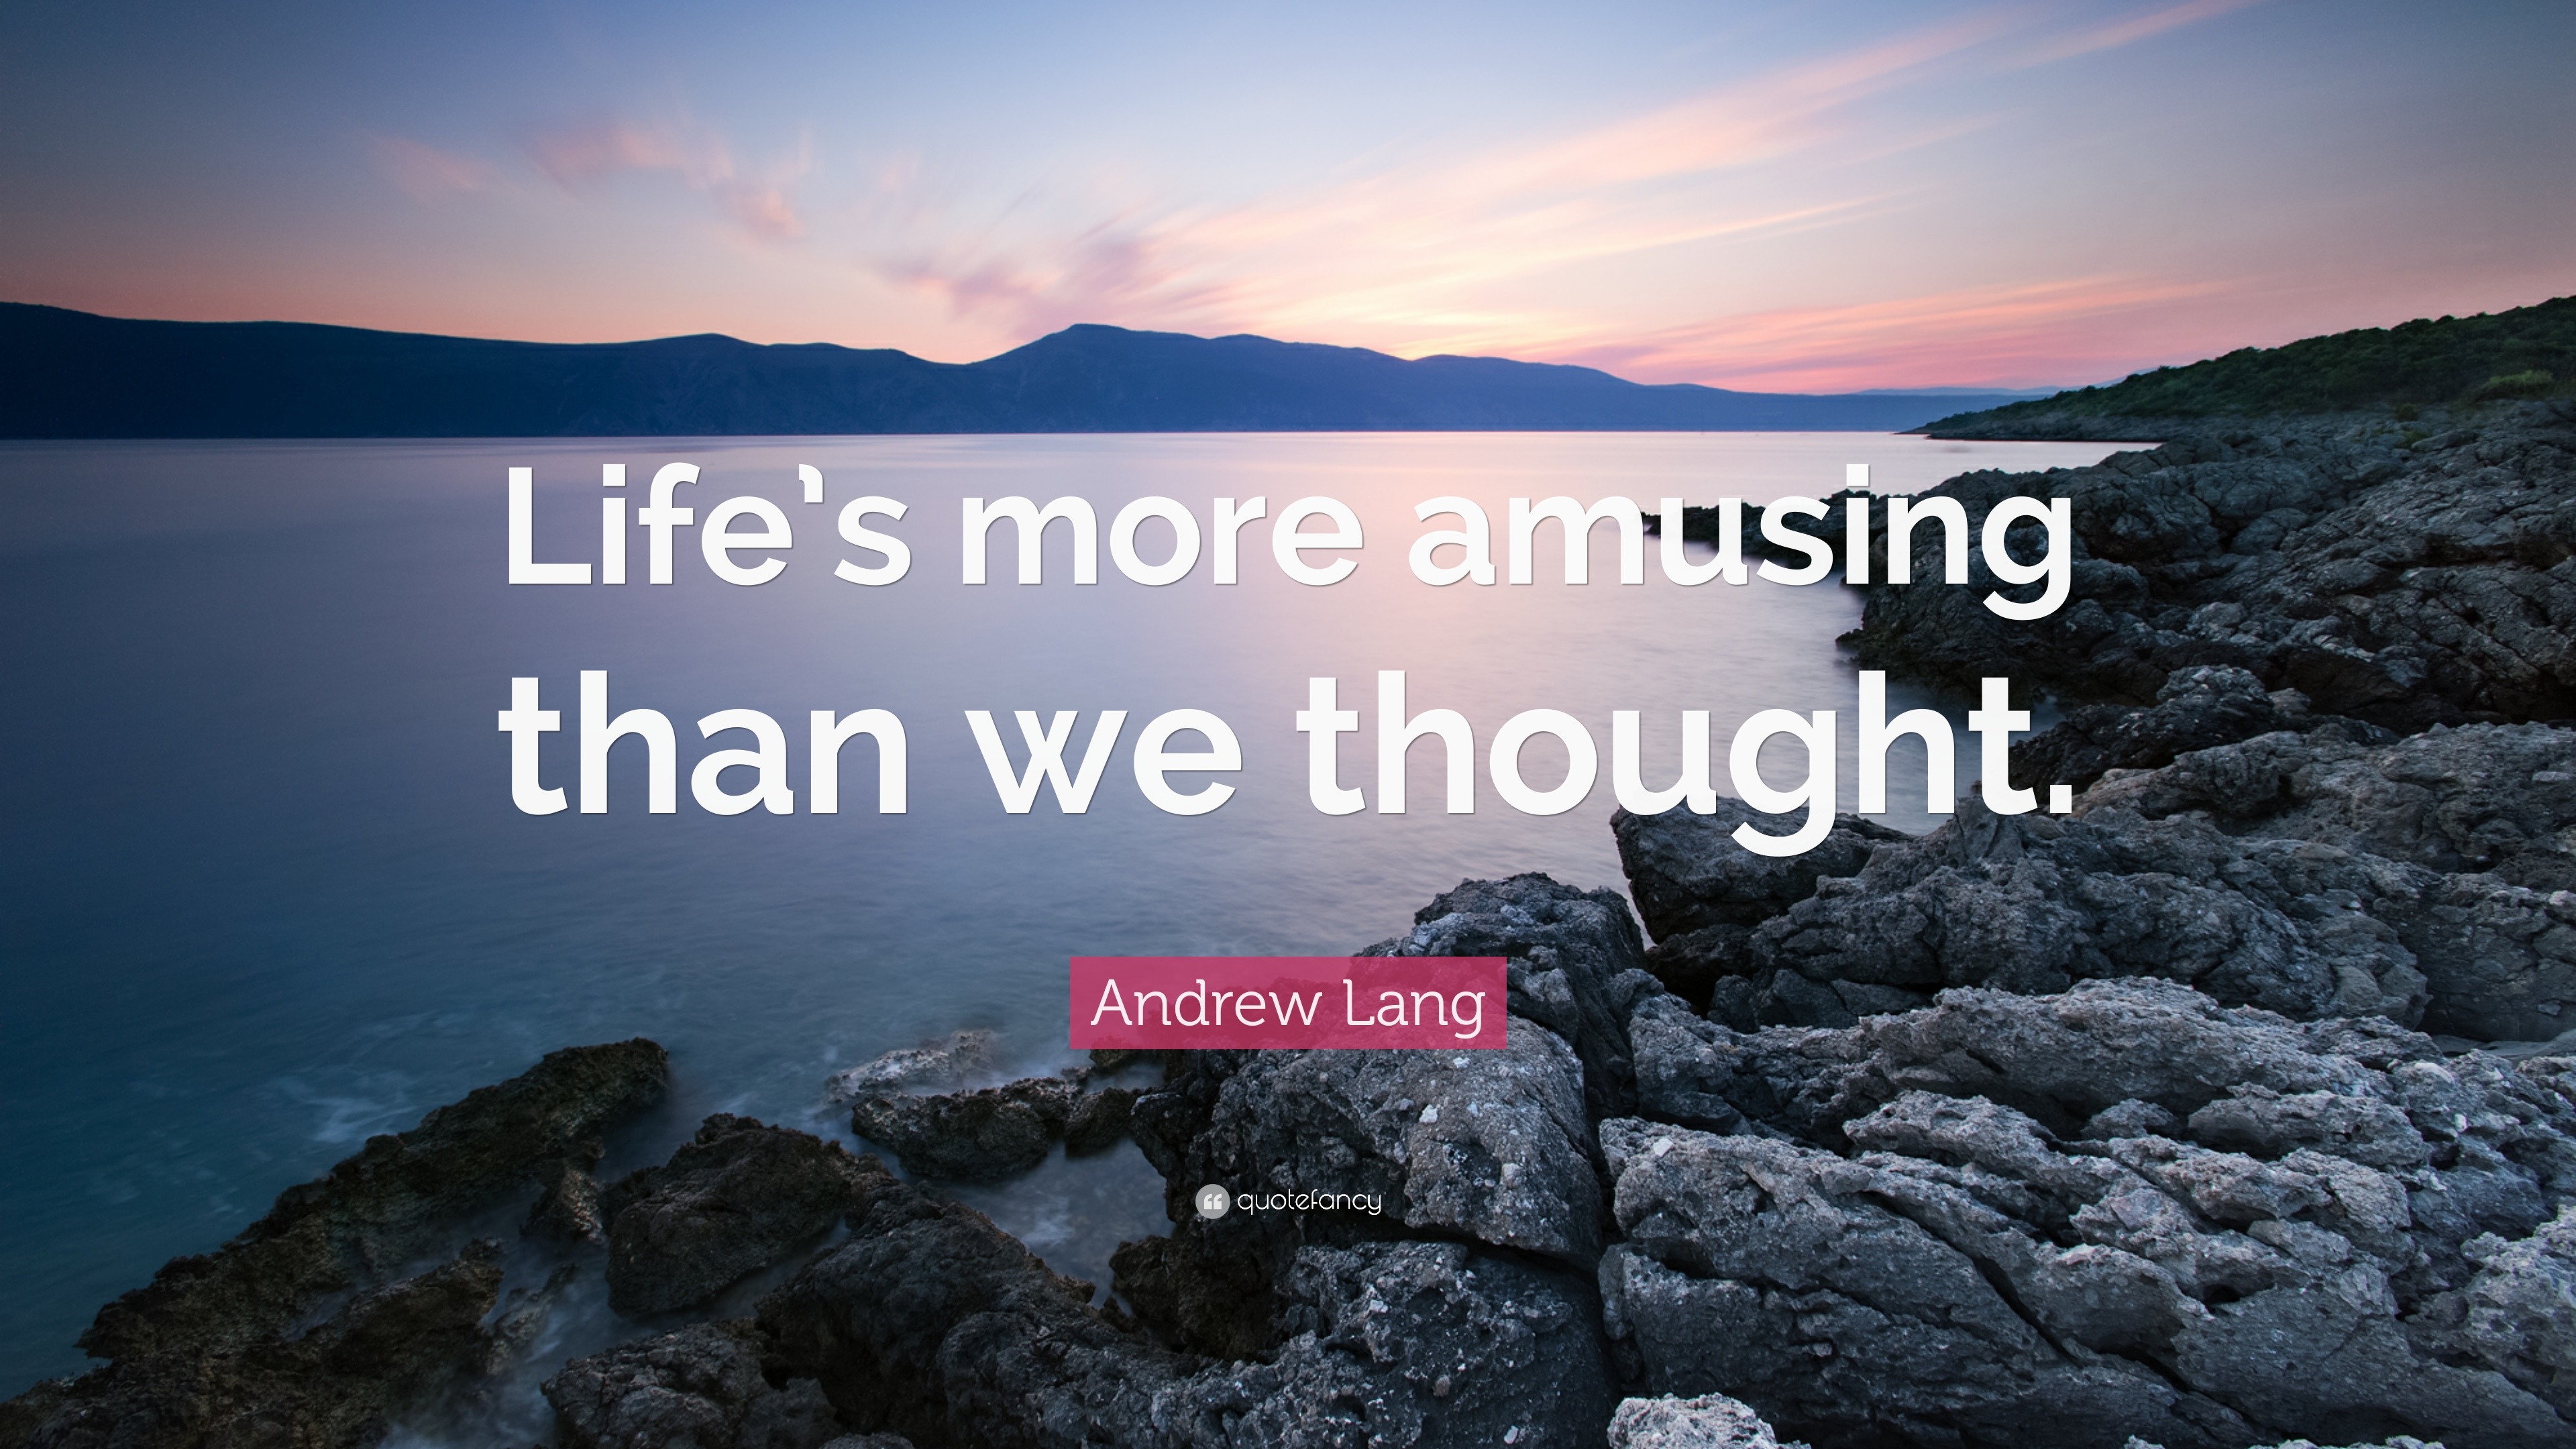 Andrew Lang Quote: “Life’s more amusing than we thought.”